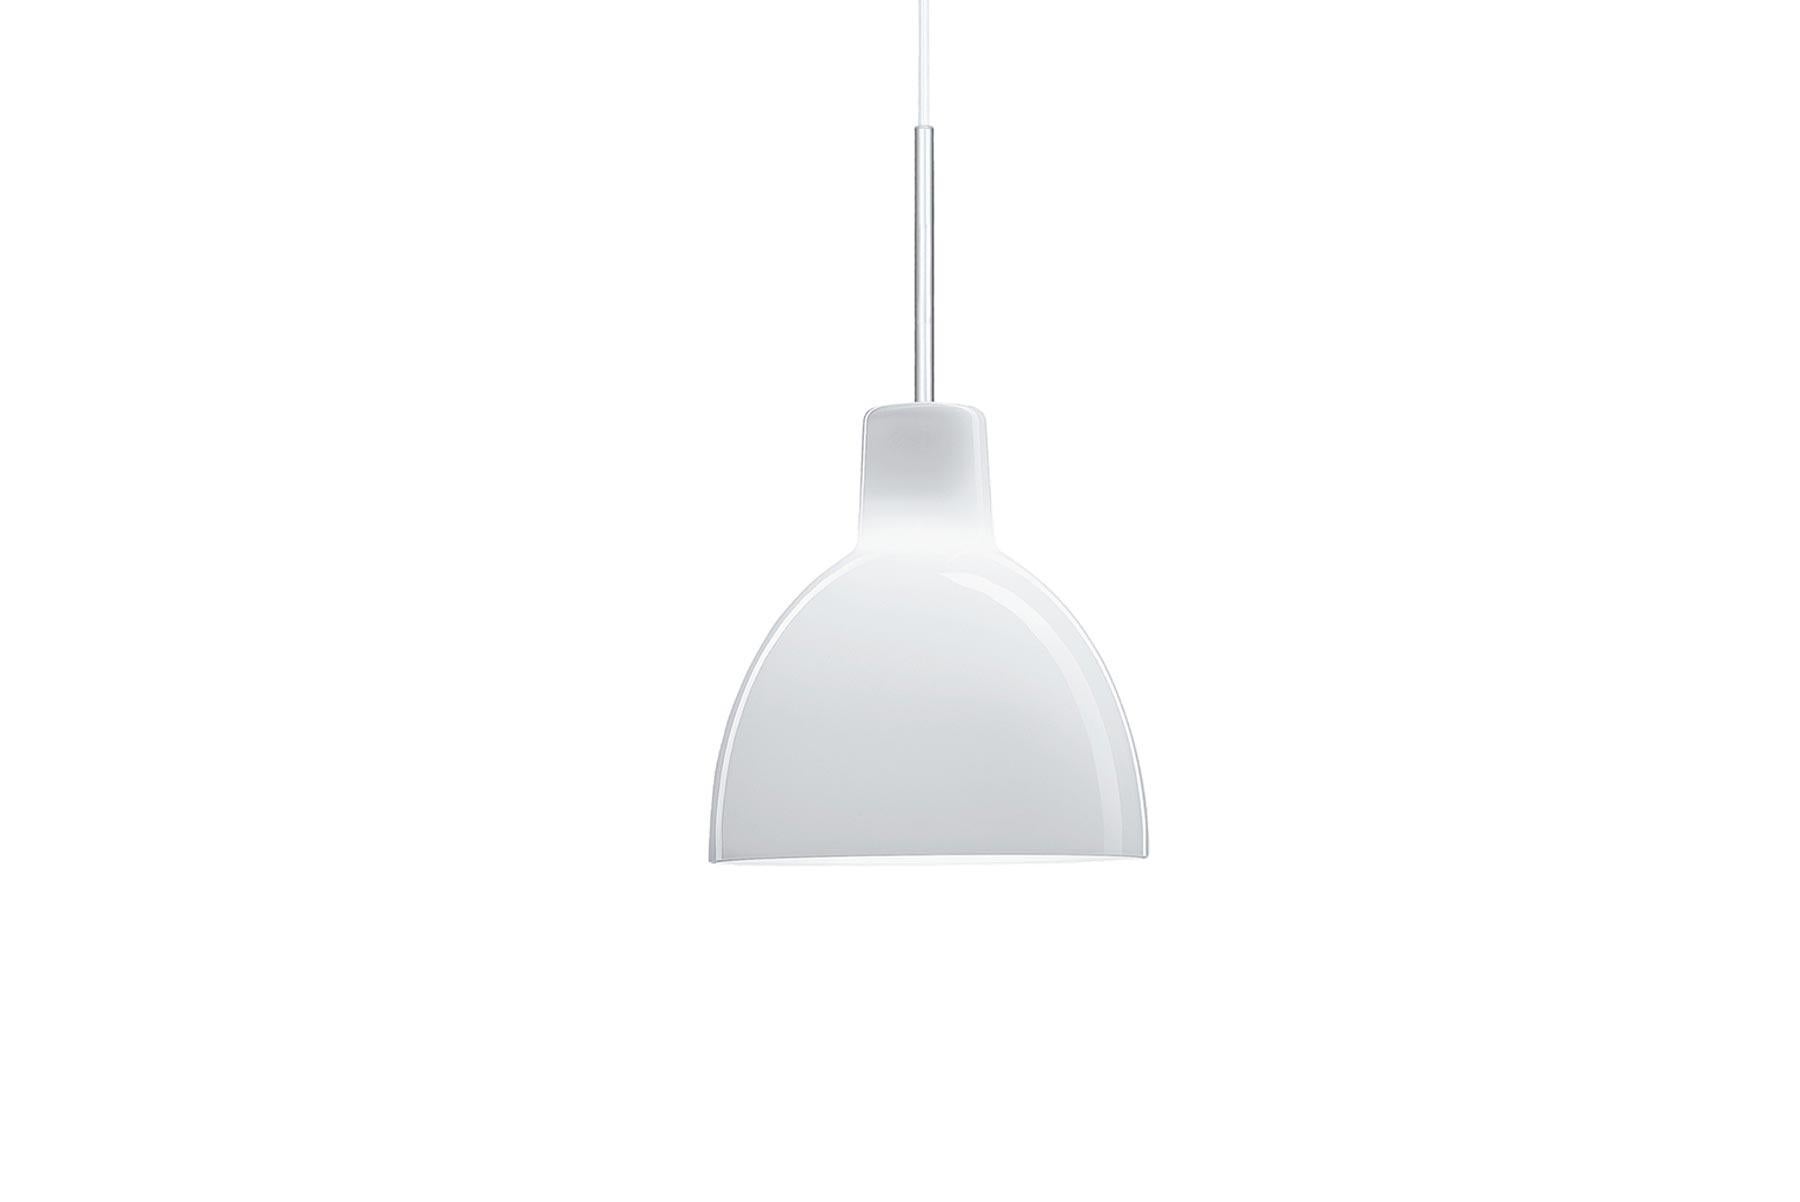 The fixture emits glare-free light directed primarily downwards. The opal glass provides a comfortable and uniform illumination of the area around the fixture. Toldbod 6.1?/8.7? Glass Pendant was launched in 2002, and like the other Tolbod products,